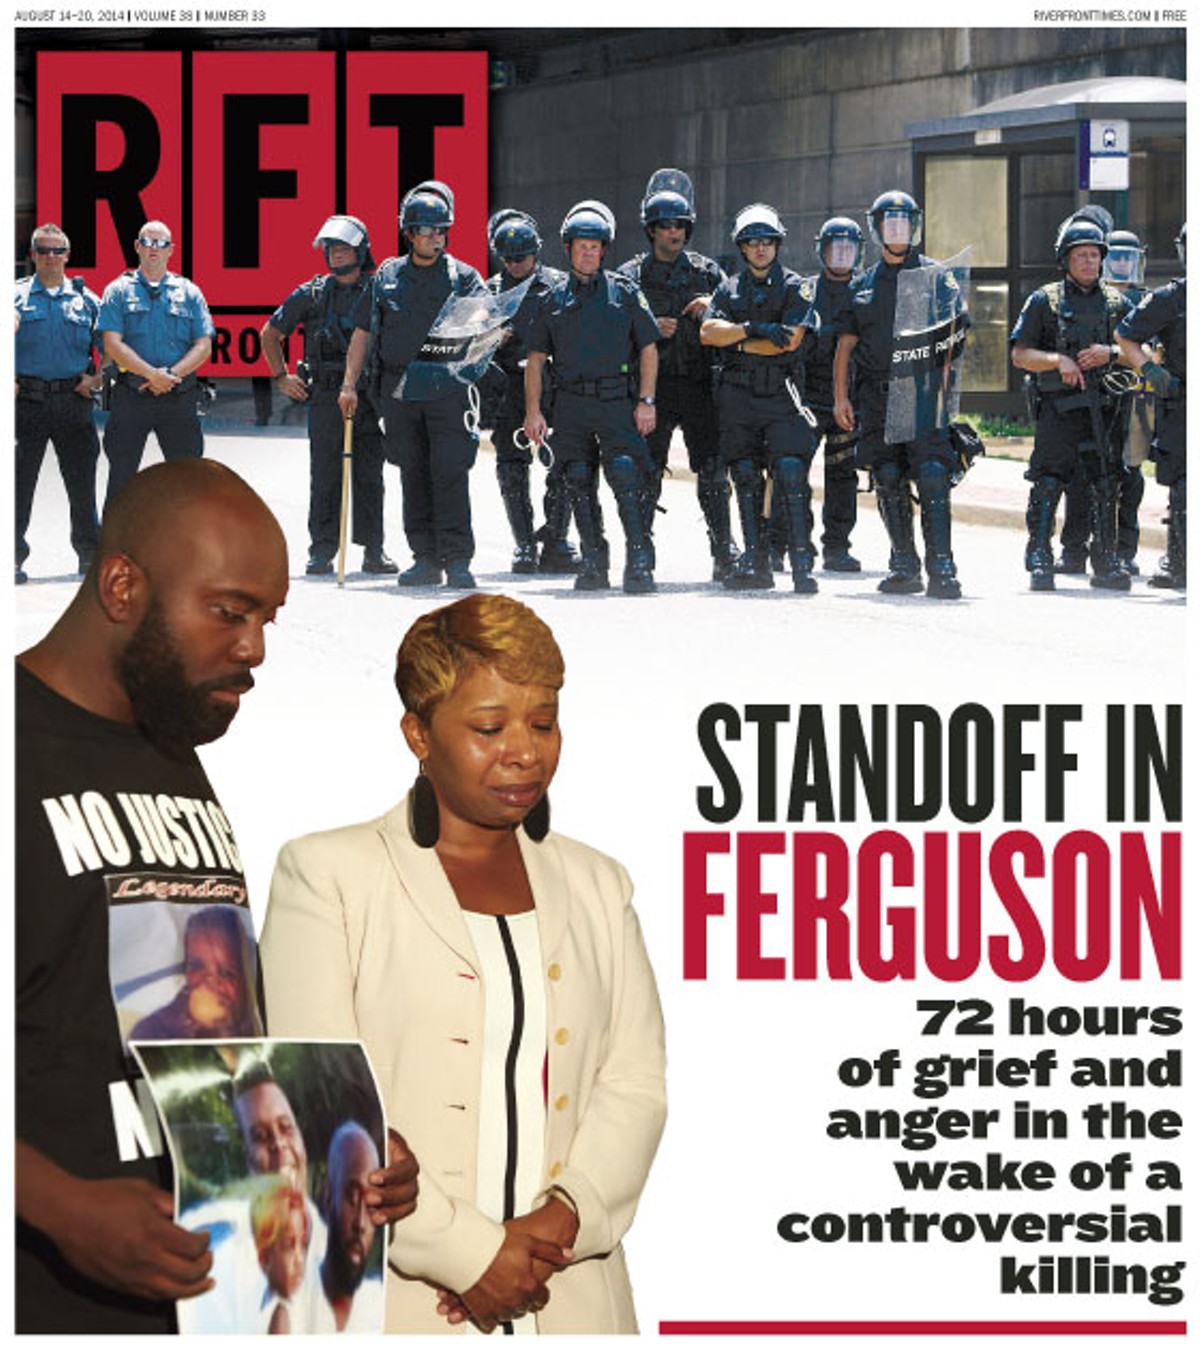 The Cover of the August 14 Print Edition